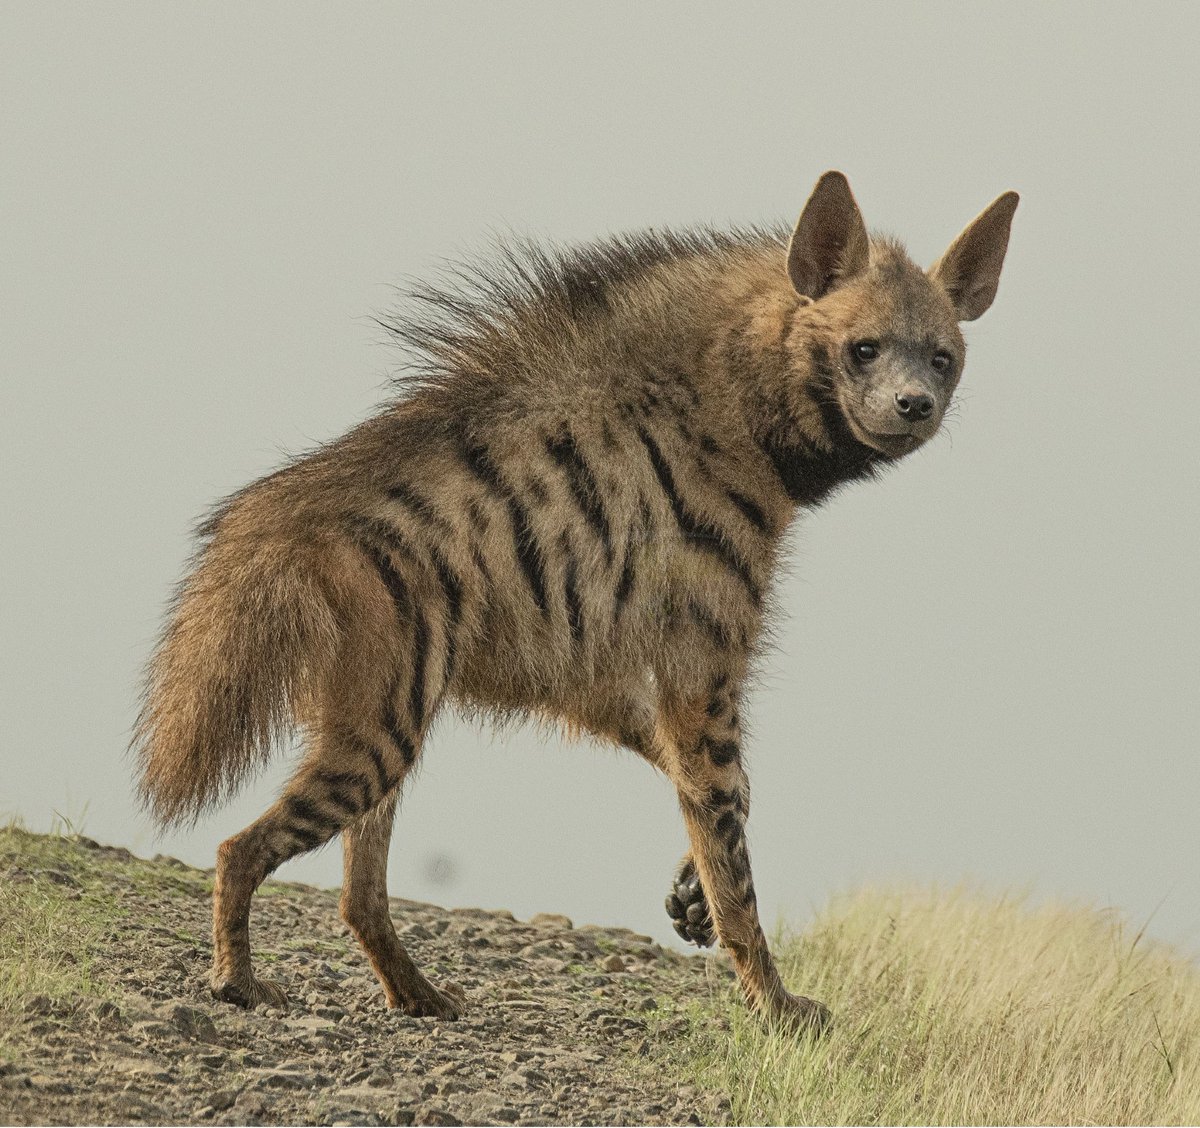 Also I don't care if scientists agree with this or not, hyenas definitely are direct descendants of all those eocene / myocene / oligocene 'is it a wolf, is it a lion or is it a bear?' species. Shout out to those goofy goobers (in a positive way).